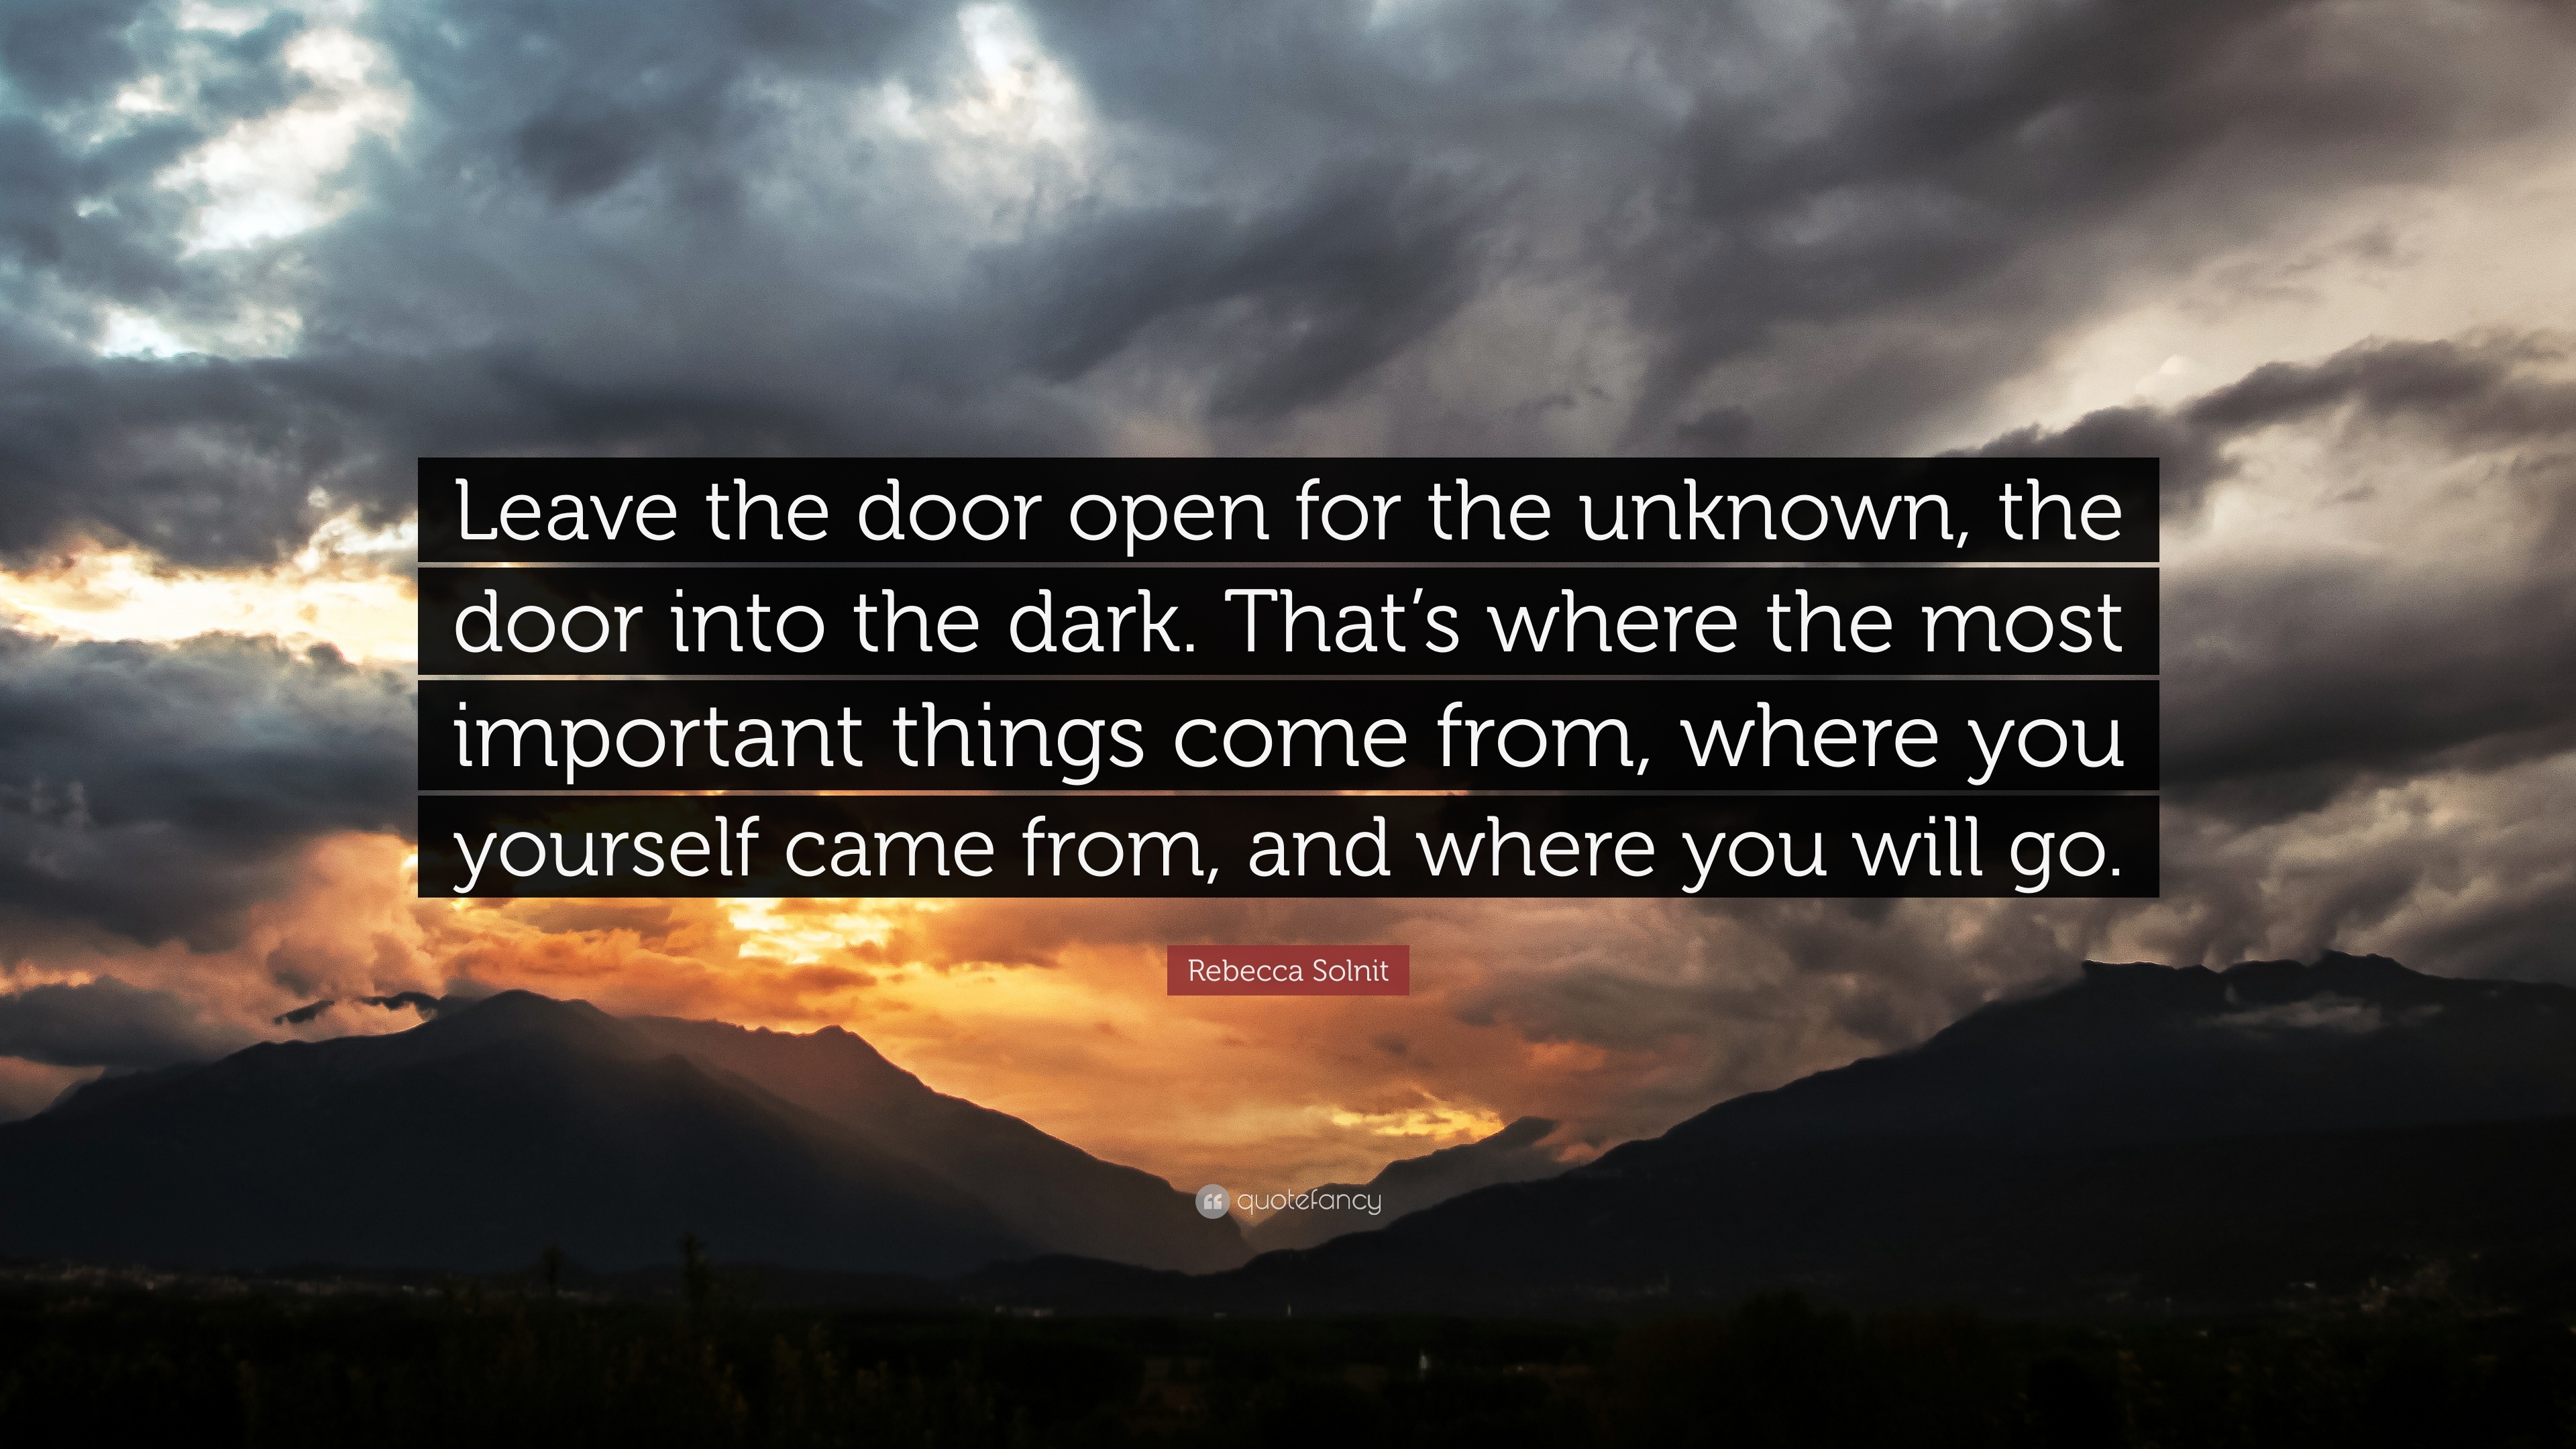 Rebecca Solnit Quote: “Leave the door open for the unknown, the door into  the dark. That's where the most important things come from, where you...”